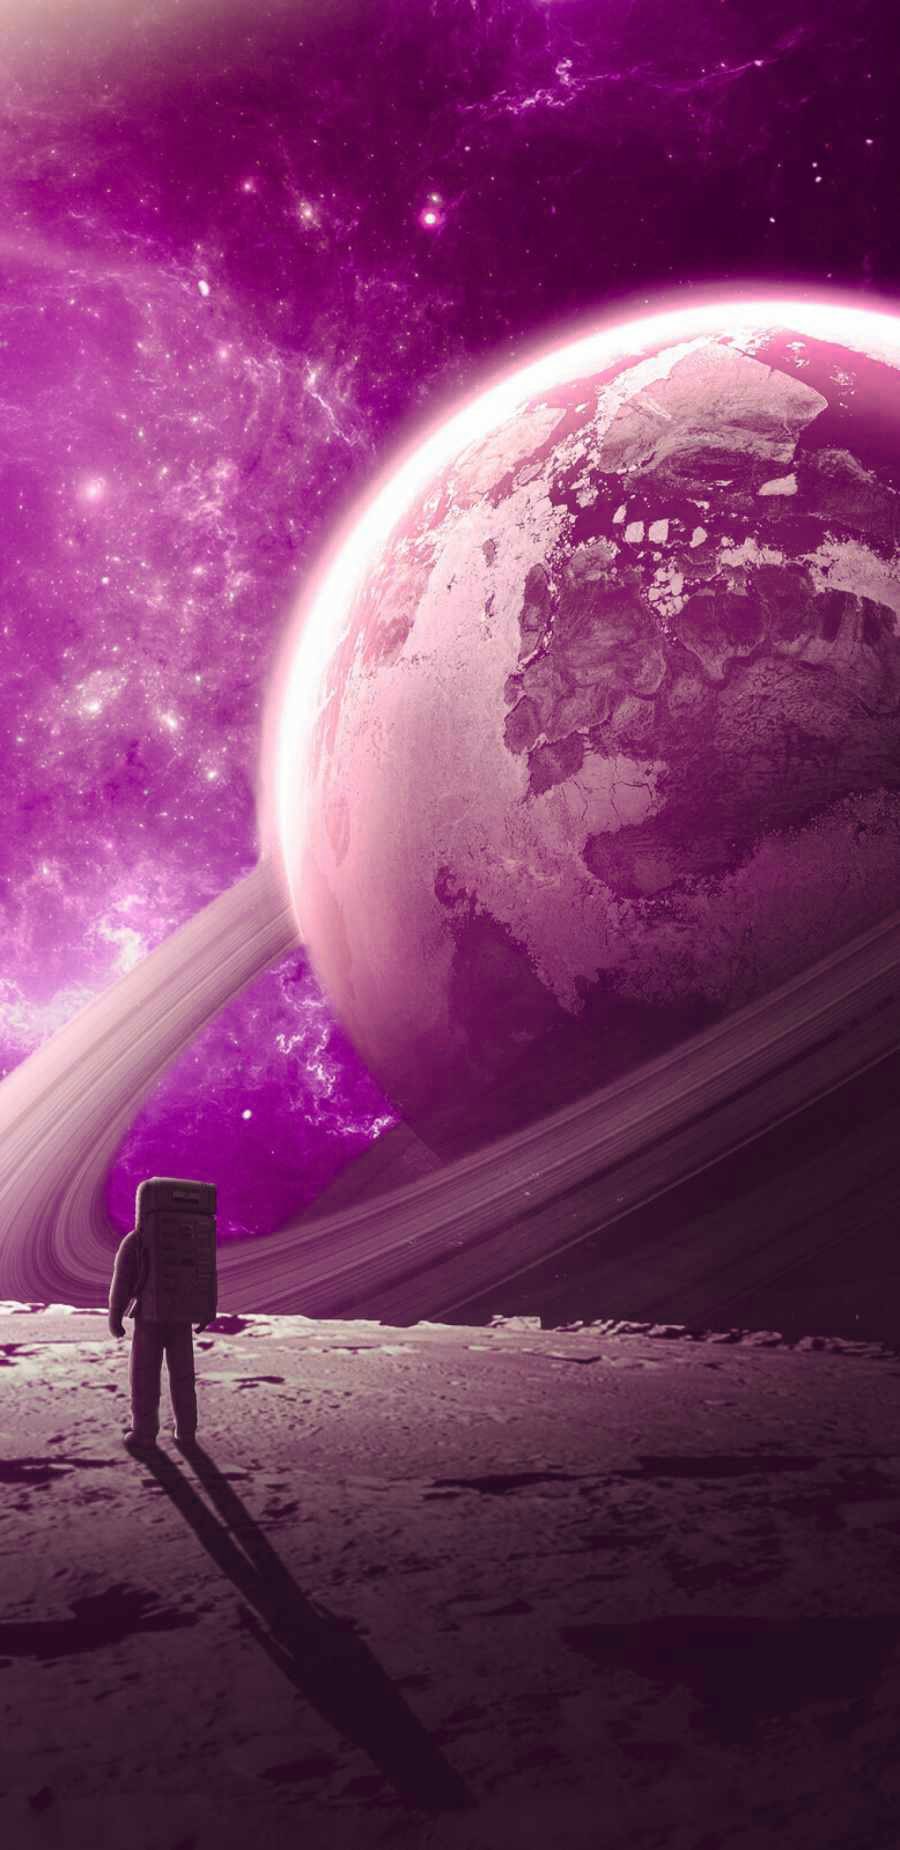 IPhone wallpaper of an astronaut standing on a planet with a purple starry sky in the background. - Galaxy, space, Earth